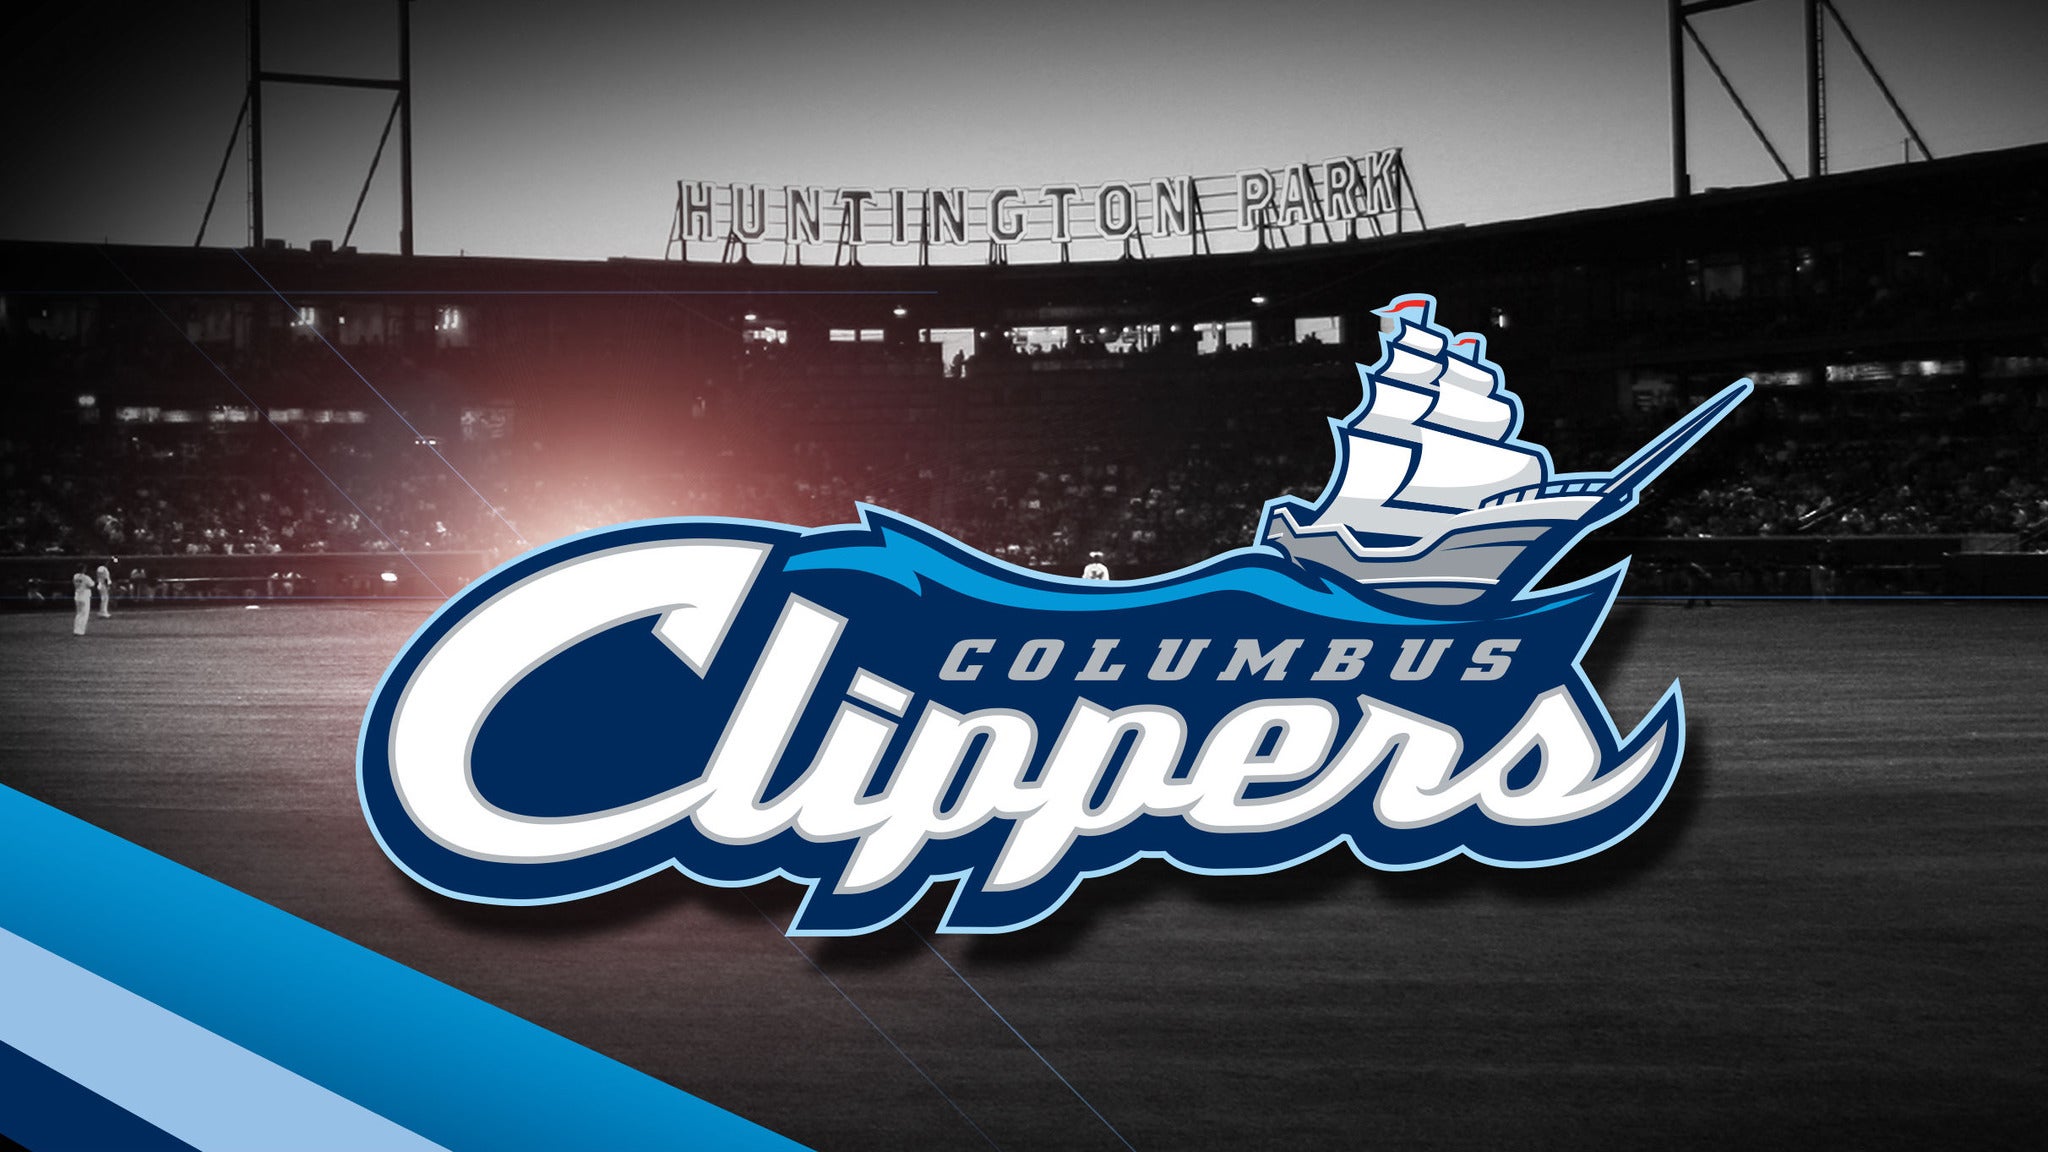 omaha storm chasers wallpaper